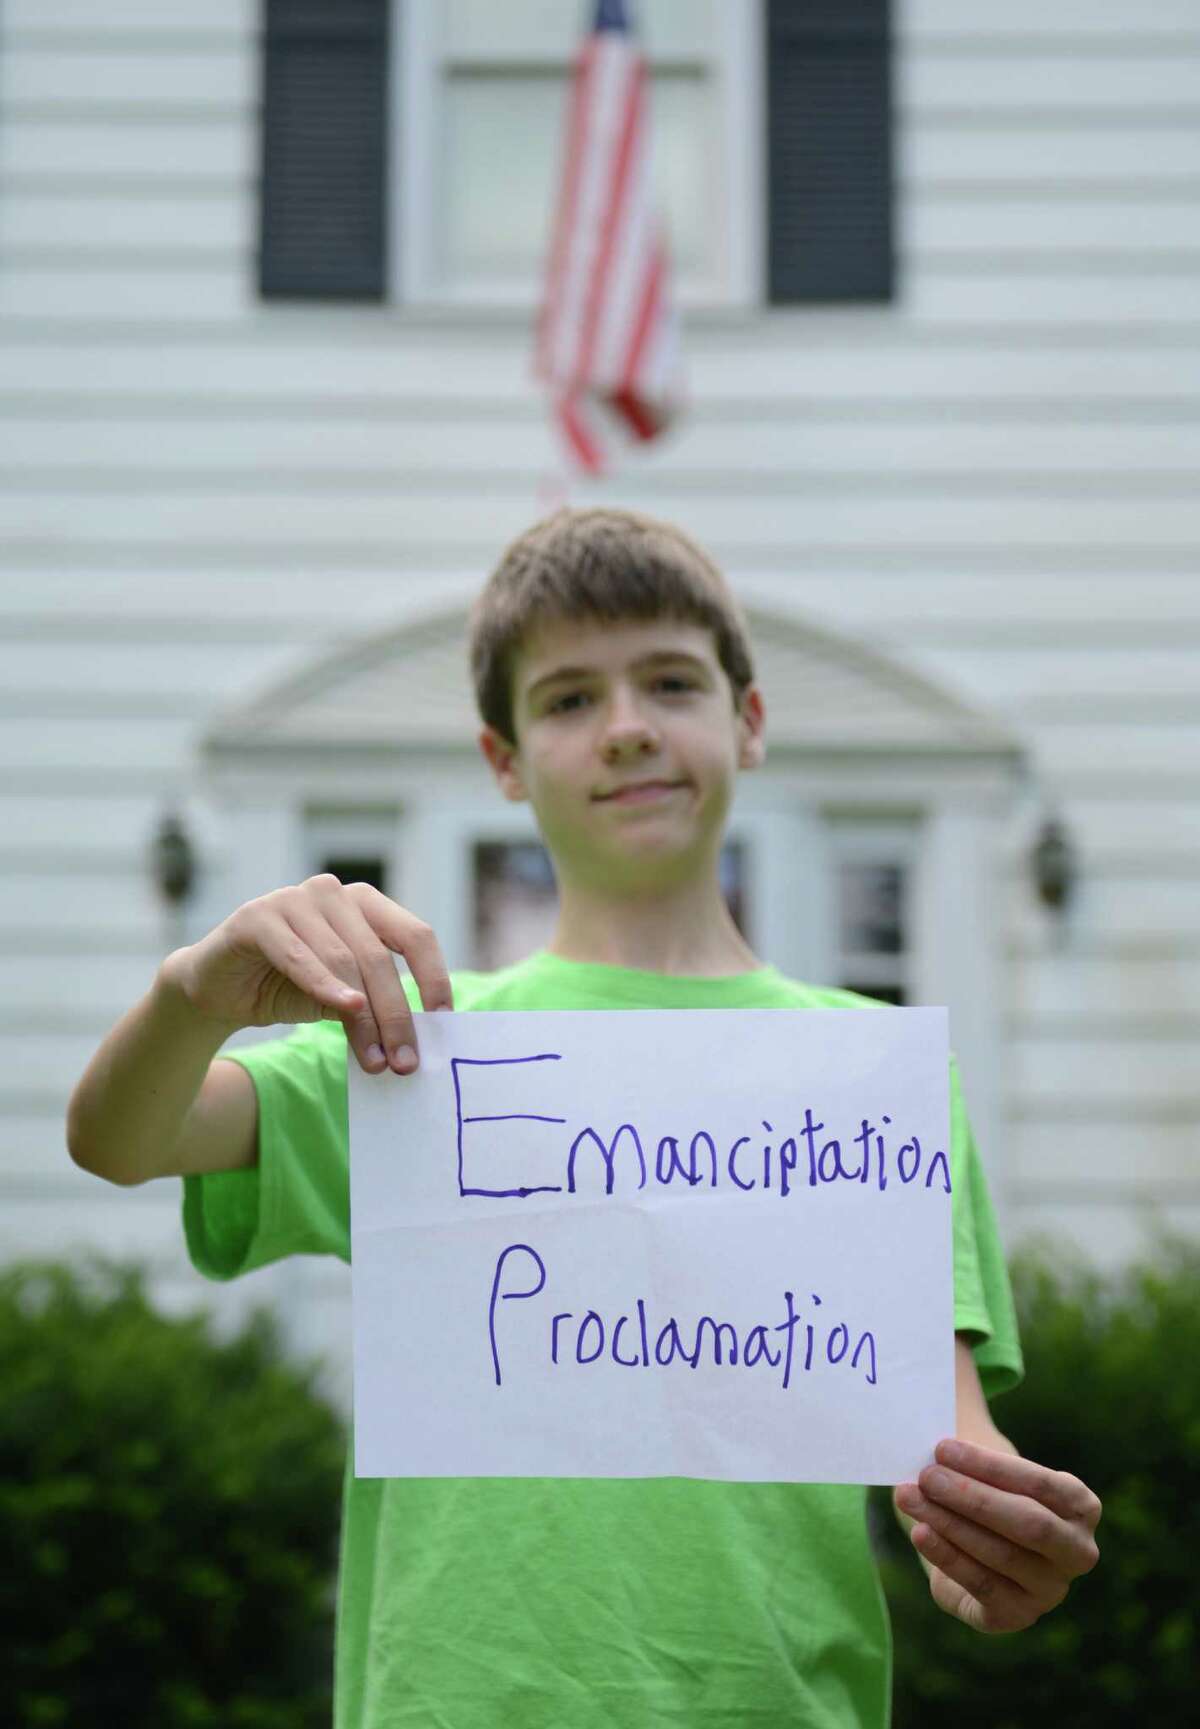 Thomas Hurley III, poses for a photo outside his home in Newtown, Conn. on Friday, August 2, 2013. The 12-year-old recently appeared on Jeopardy, spelling "Emancipation Proclamation" incorrectly, adding an extra "T," during Final Jeopardy. The judges disqualified Hurley's answer, despite show host Alex Trebek reading it correctly, costing him $3,000.